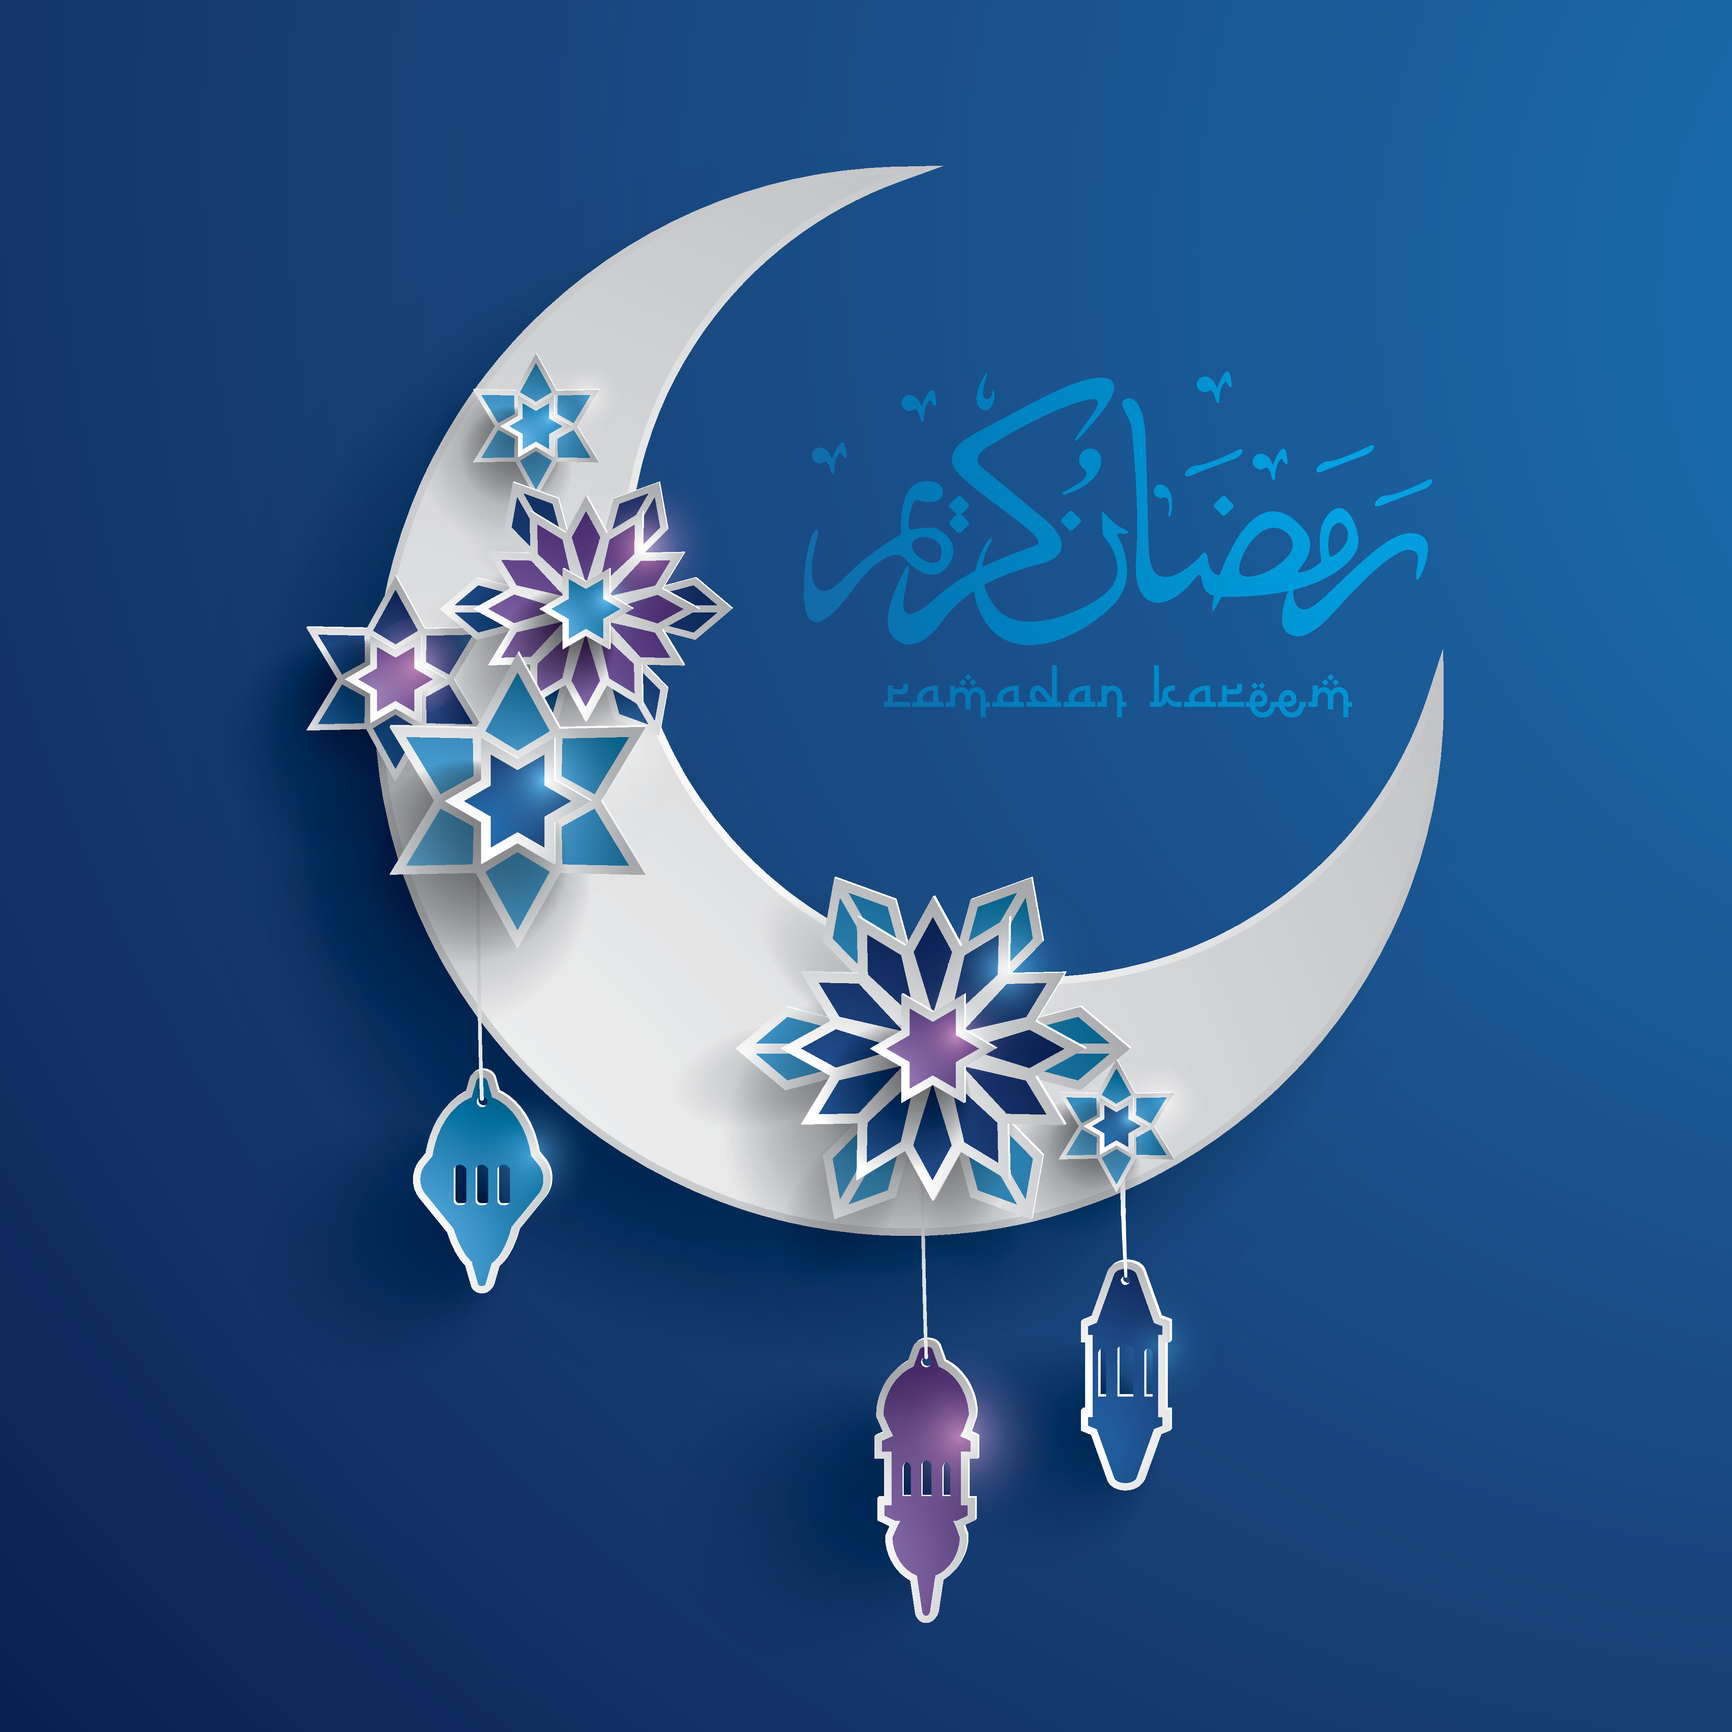 A depiction of the Islamic moon